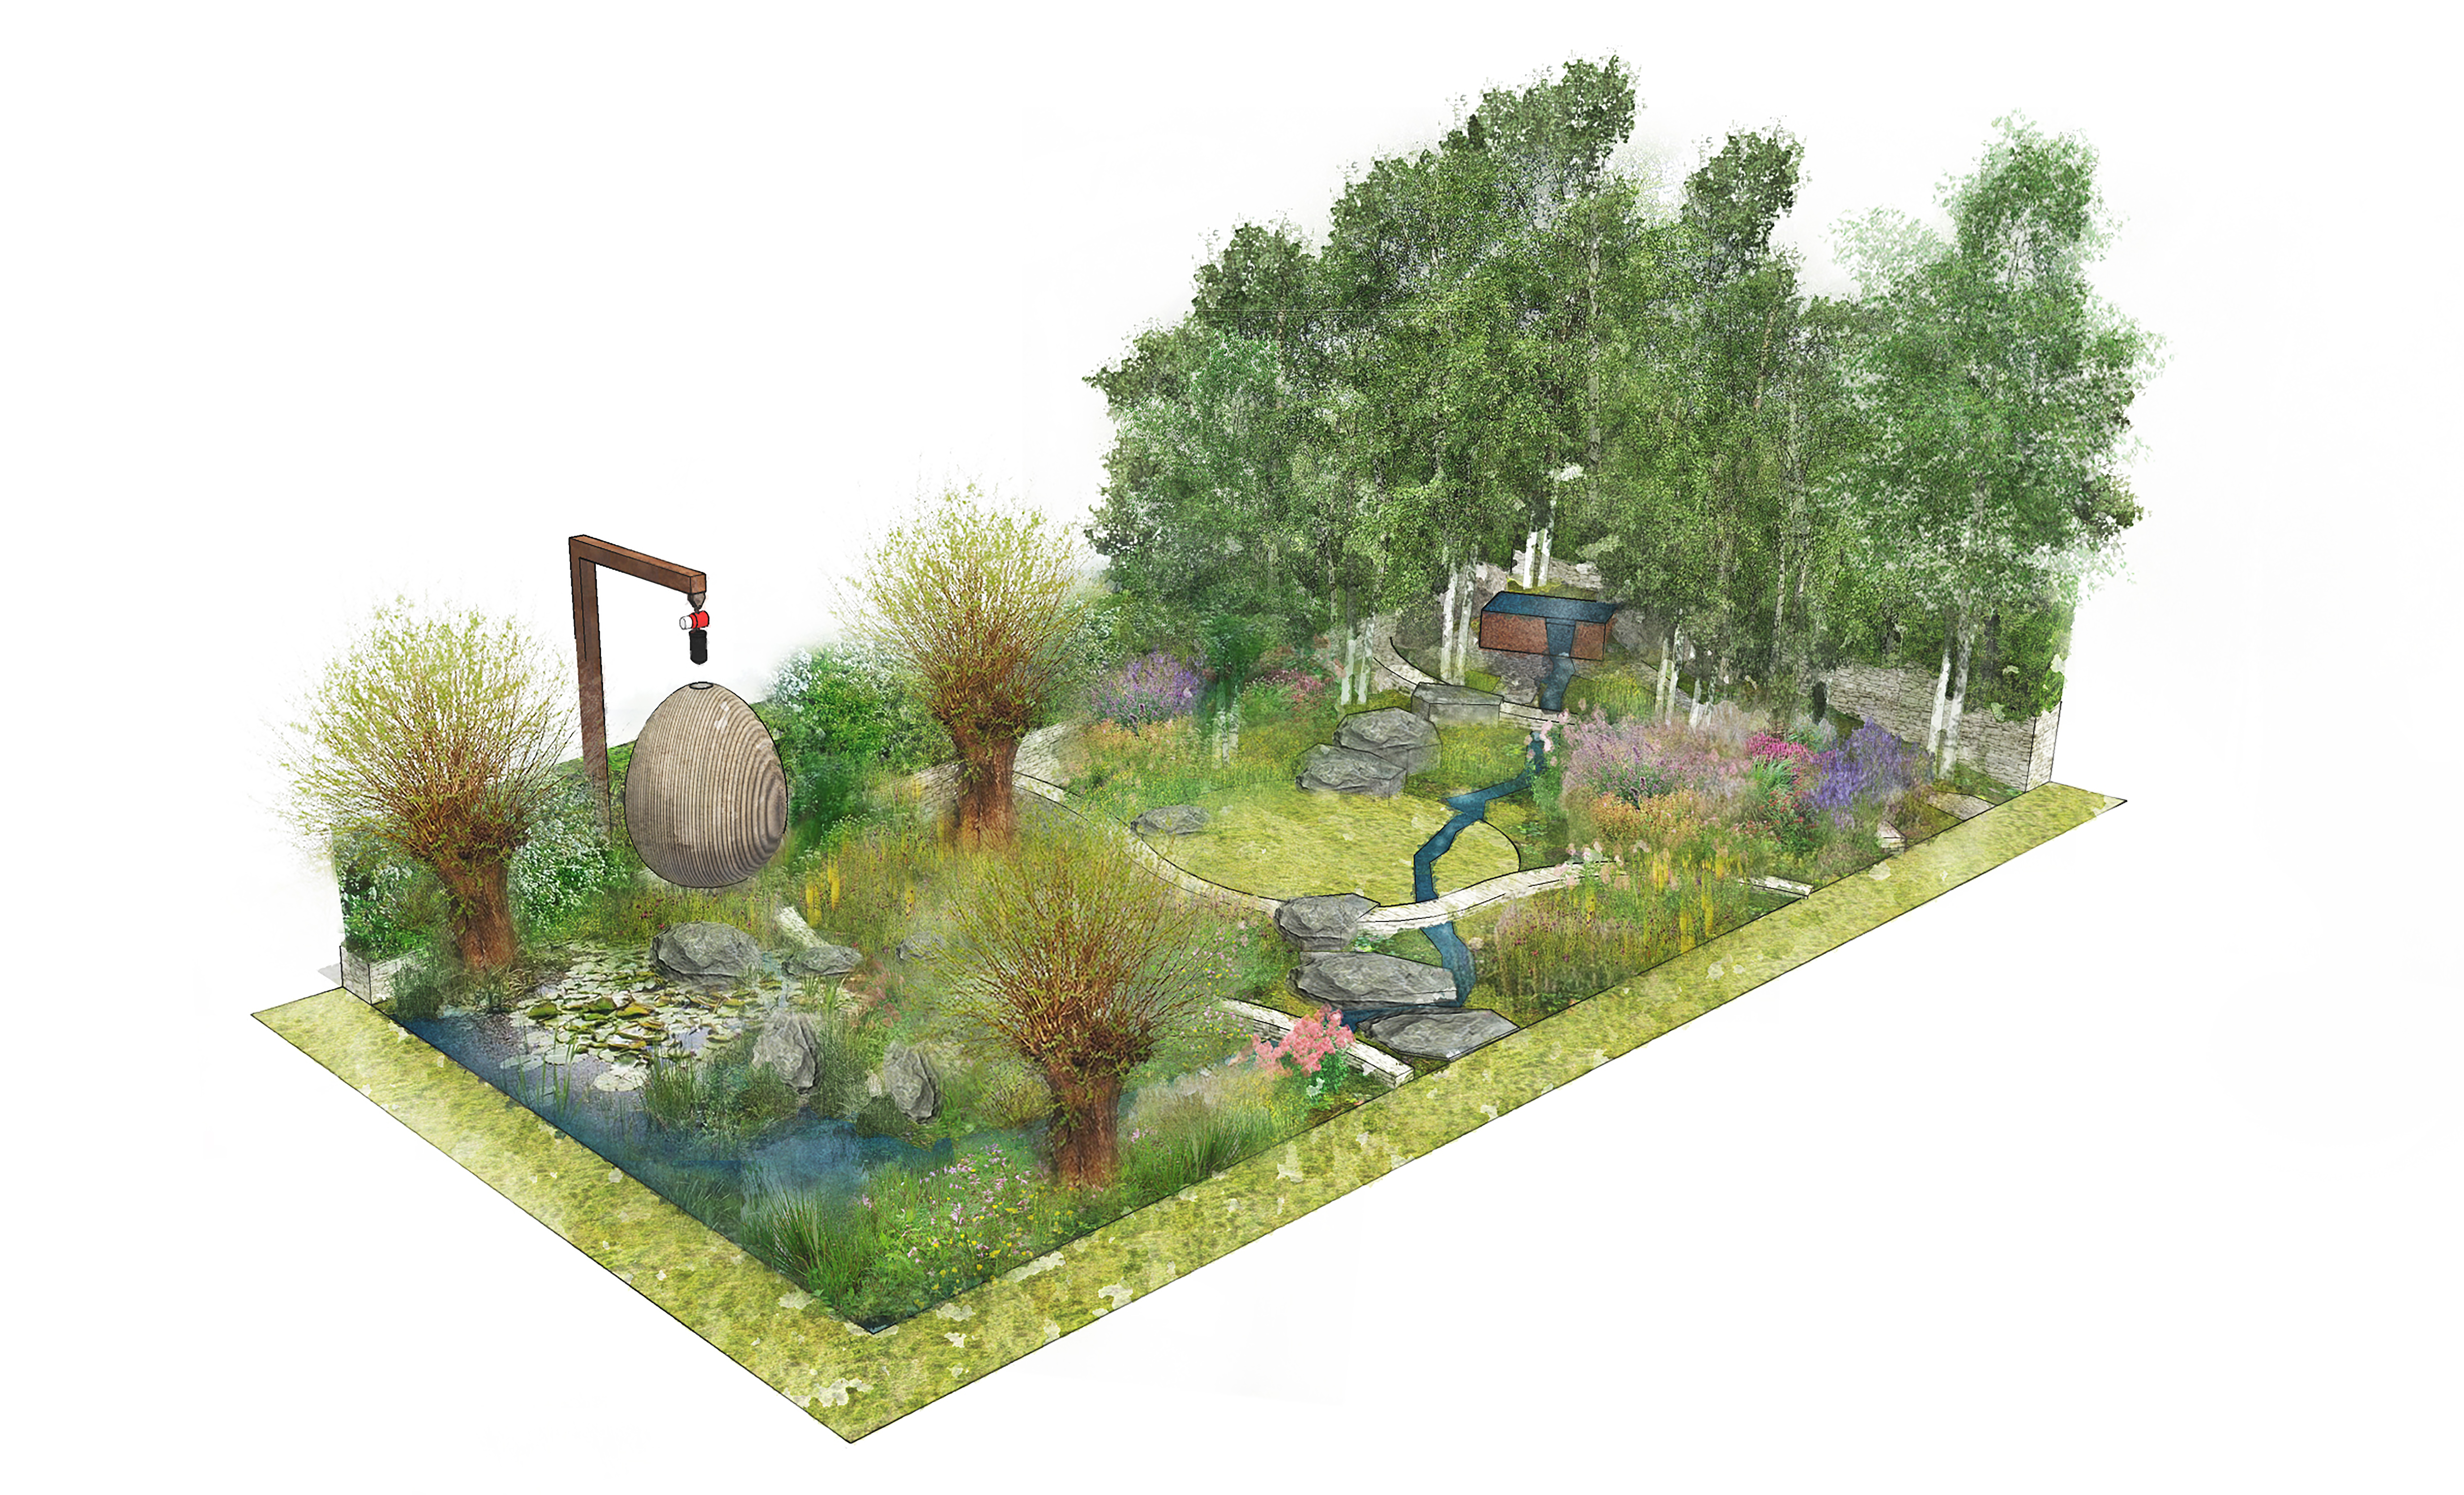 The Yeo Valley Garden will create a wildlife-friendly space (Tom Massey/PA)